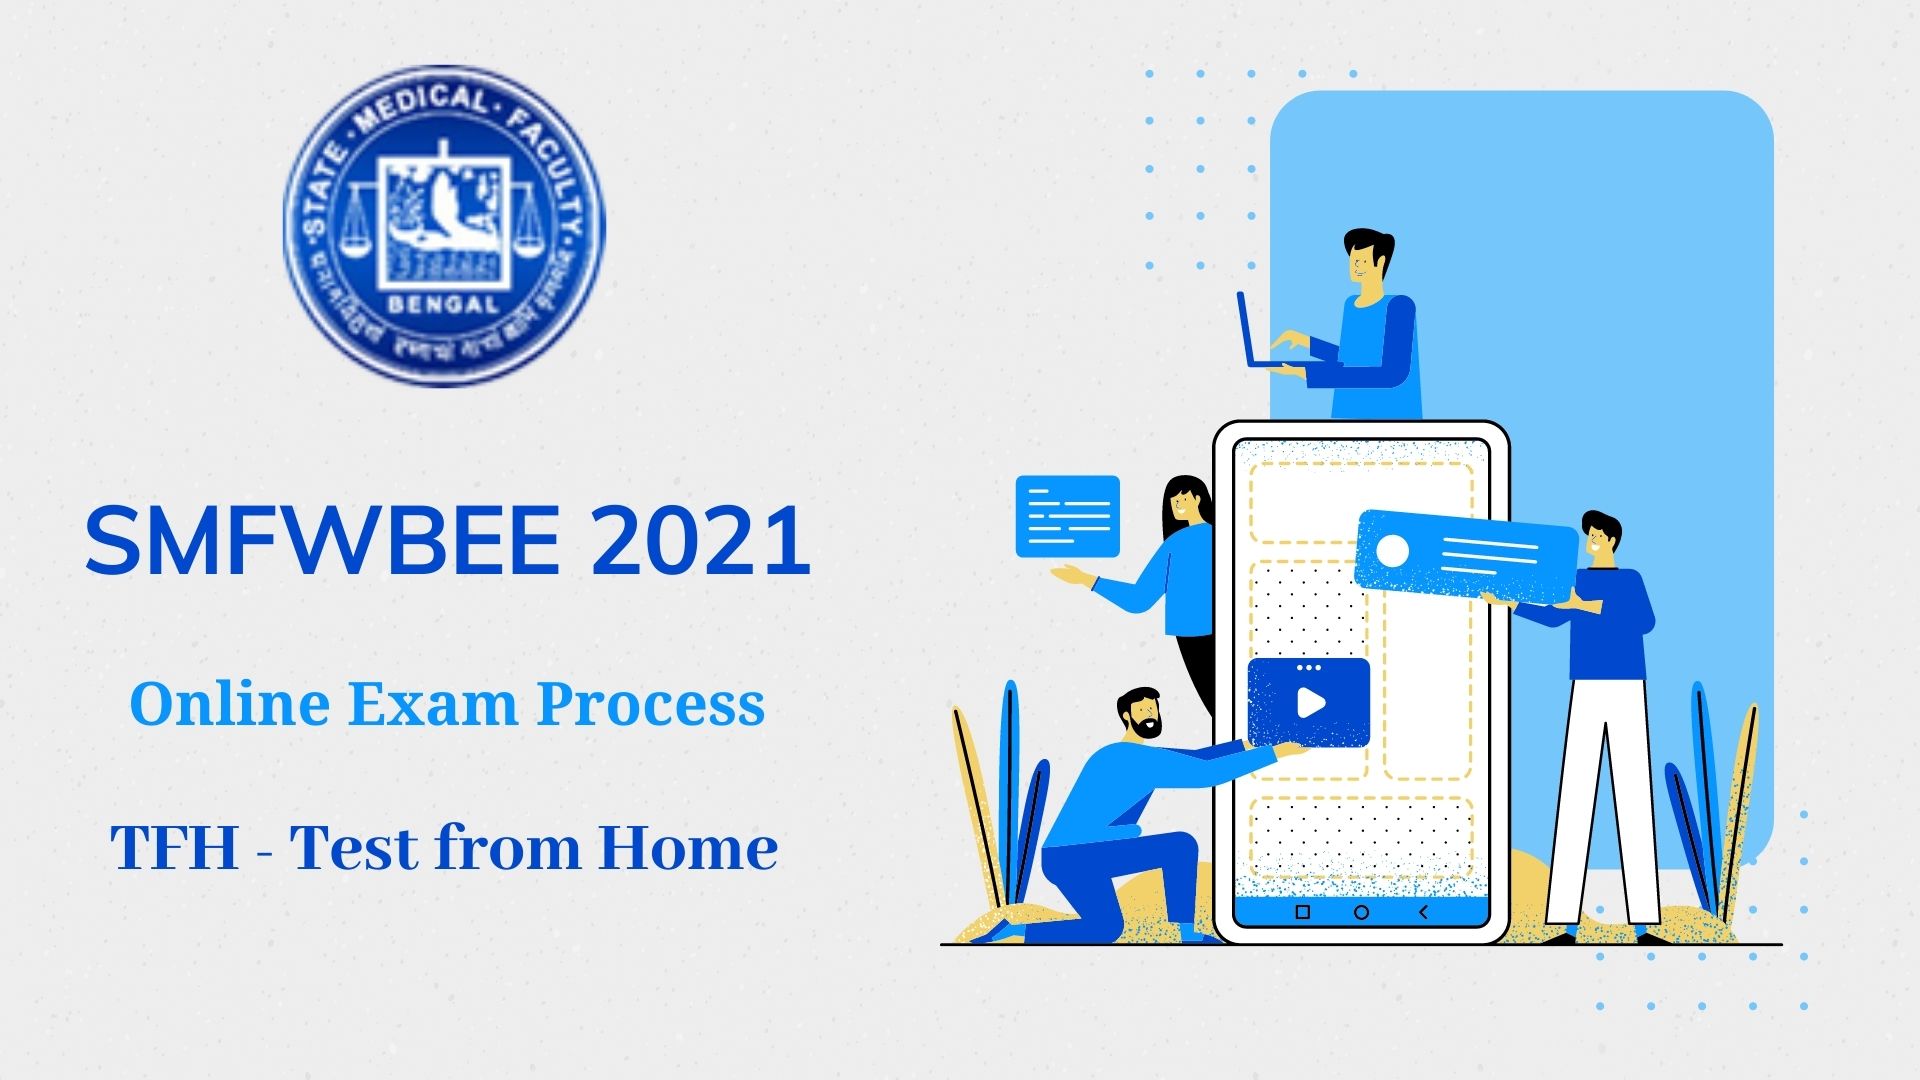 SMFWBEE 2021 Online Exam Test from Home